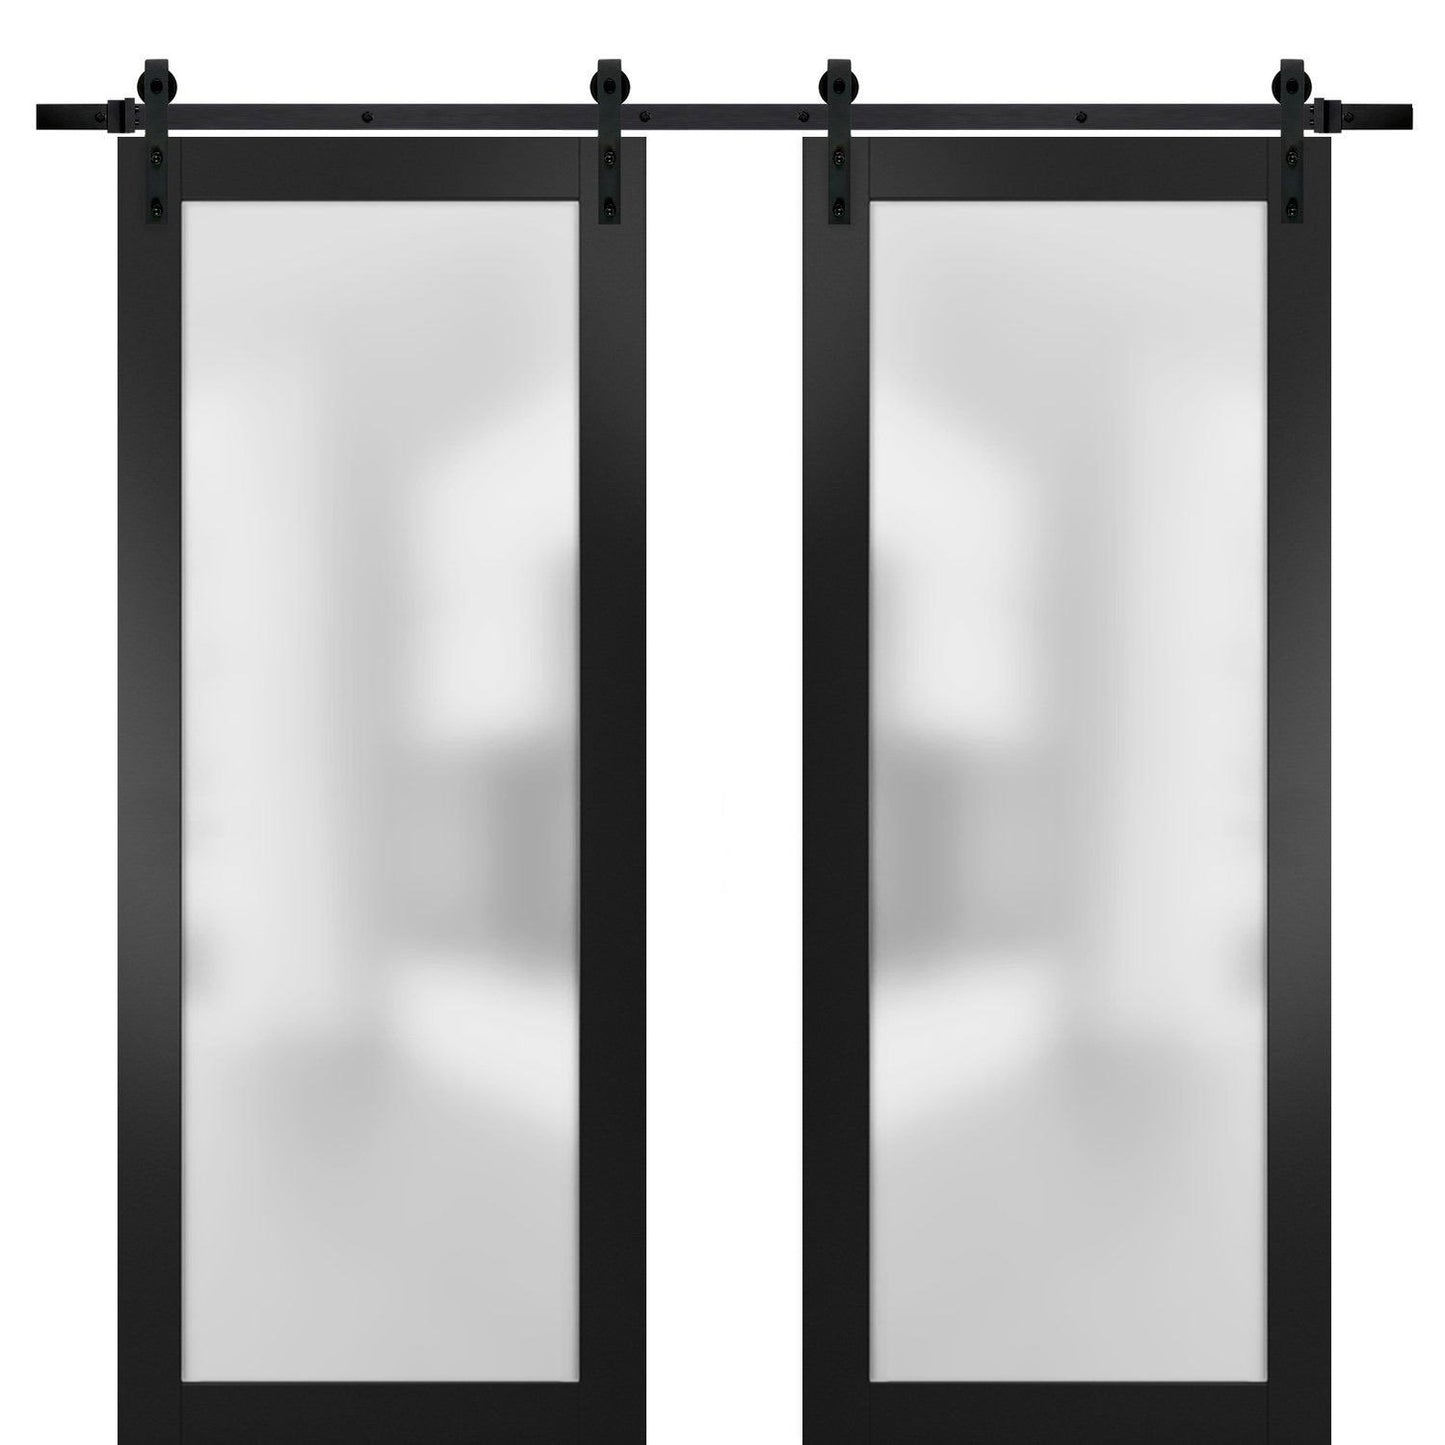 Planum 2102 Black Matte Double Barn Door with Frosted Glass | Black Rail